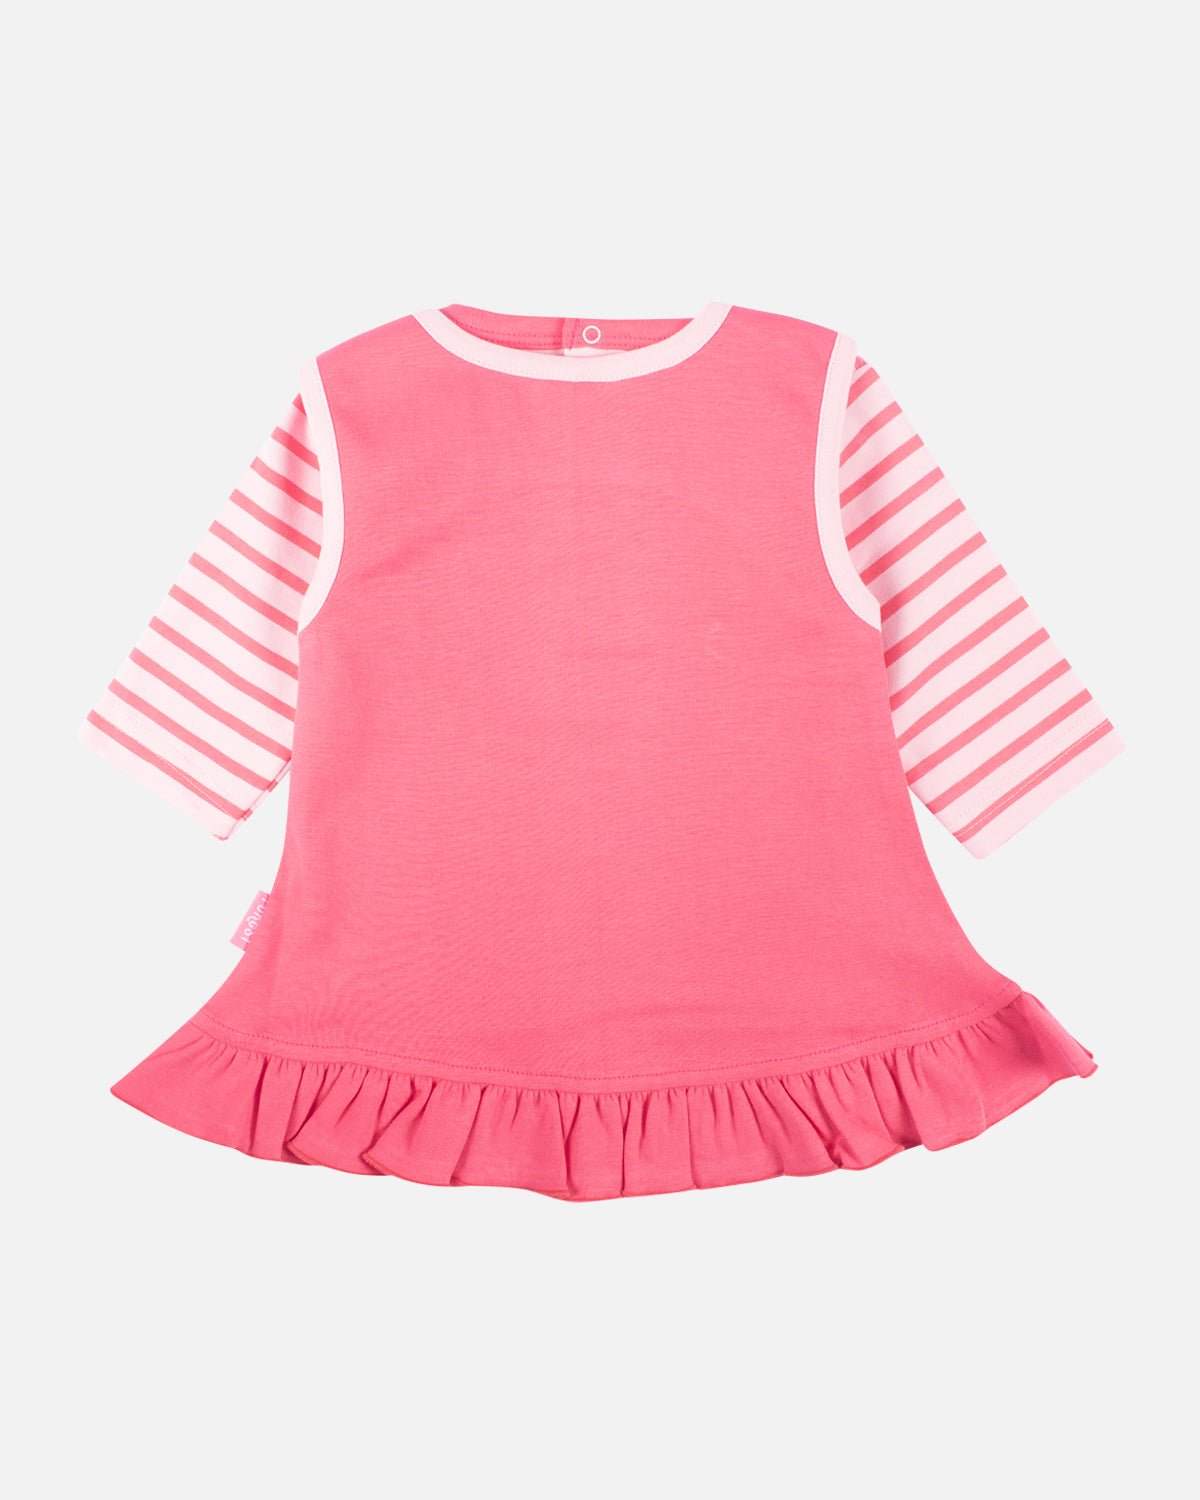 NFFC Baby Pink Pinafore Set - Nottingham Forest FC